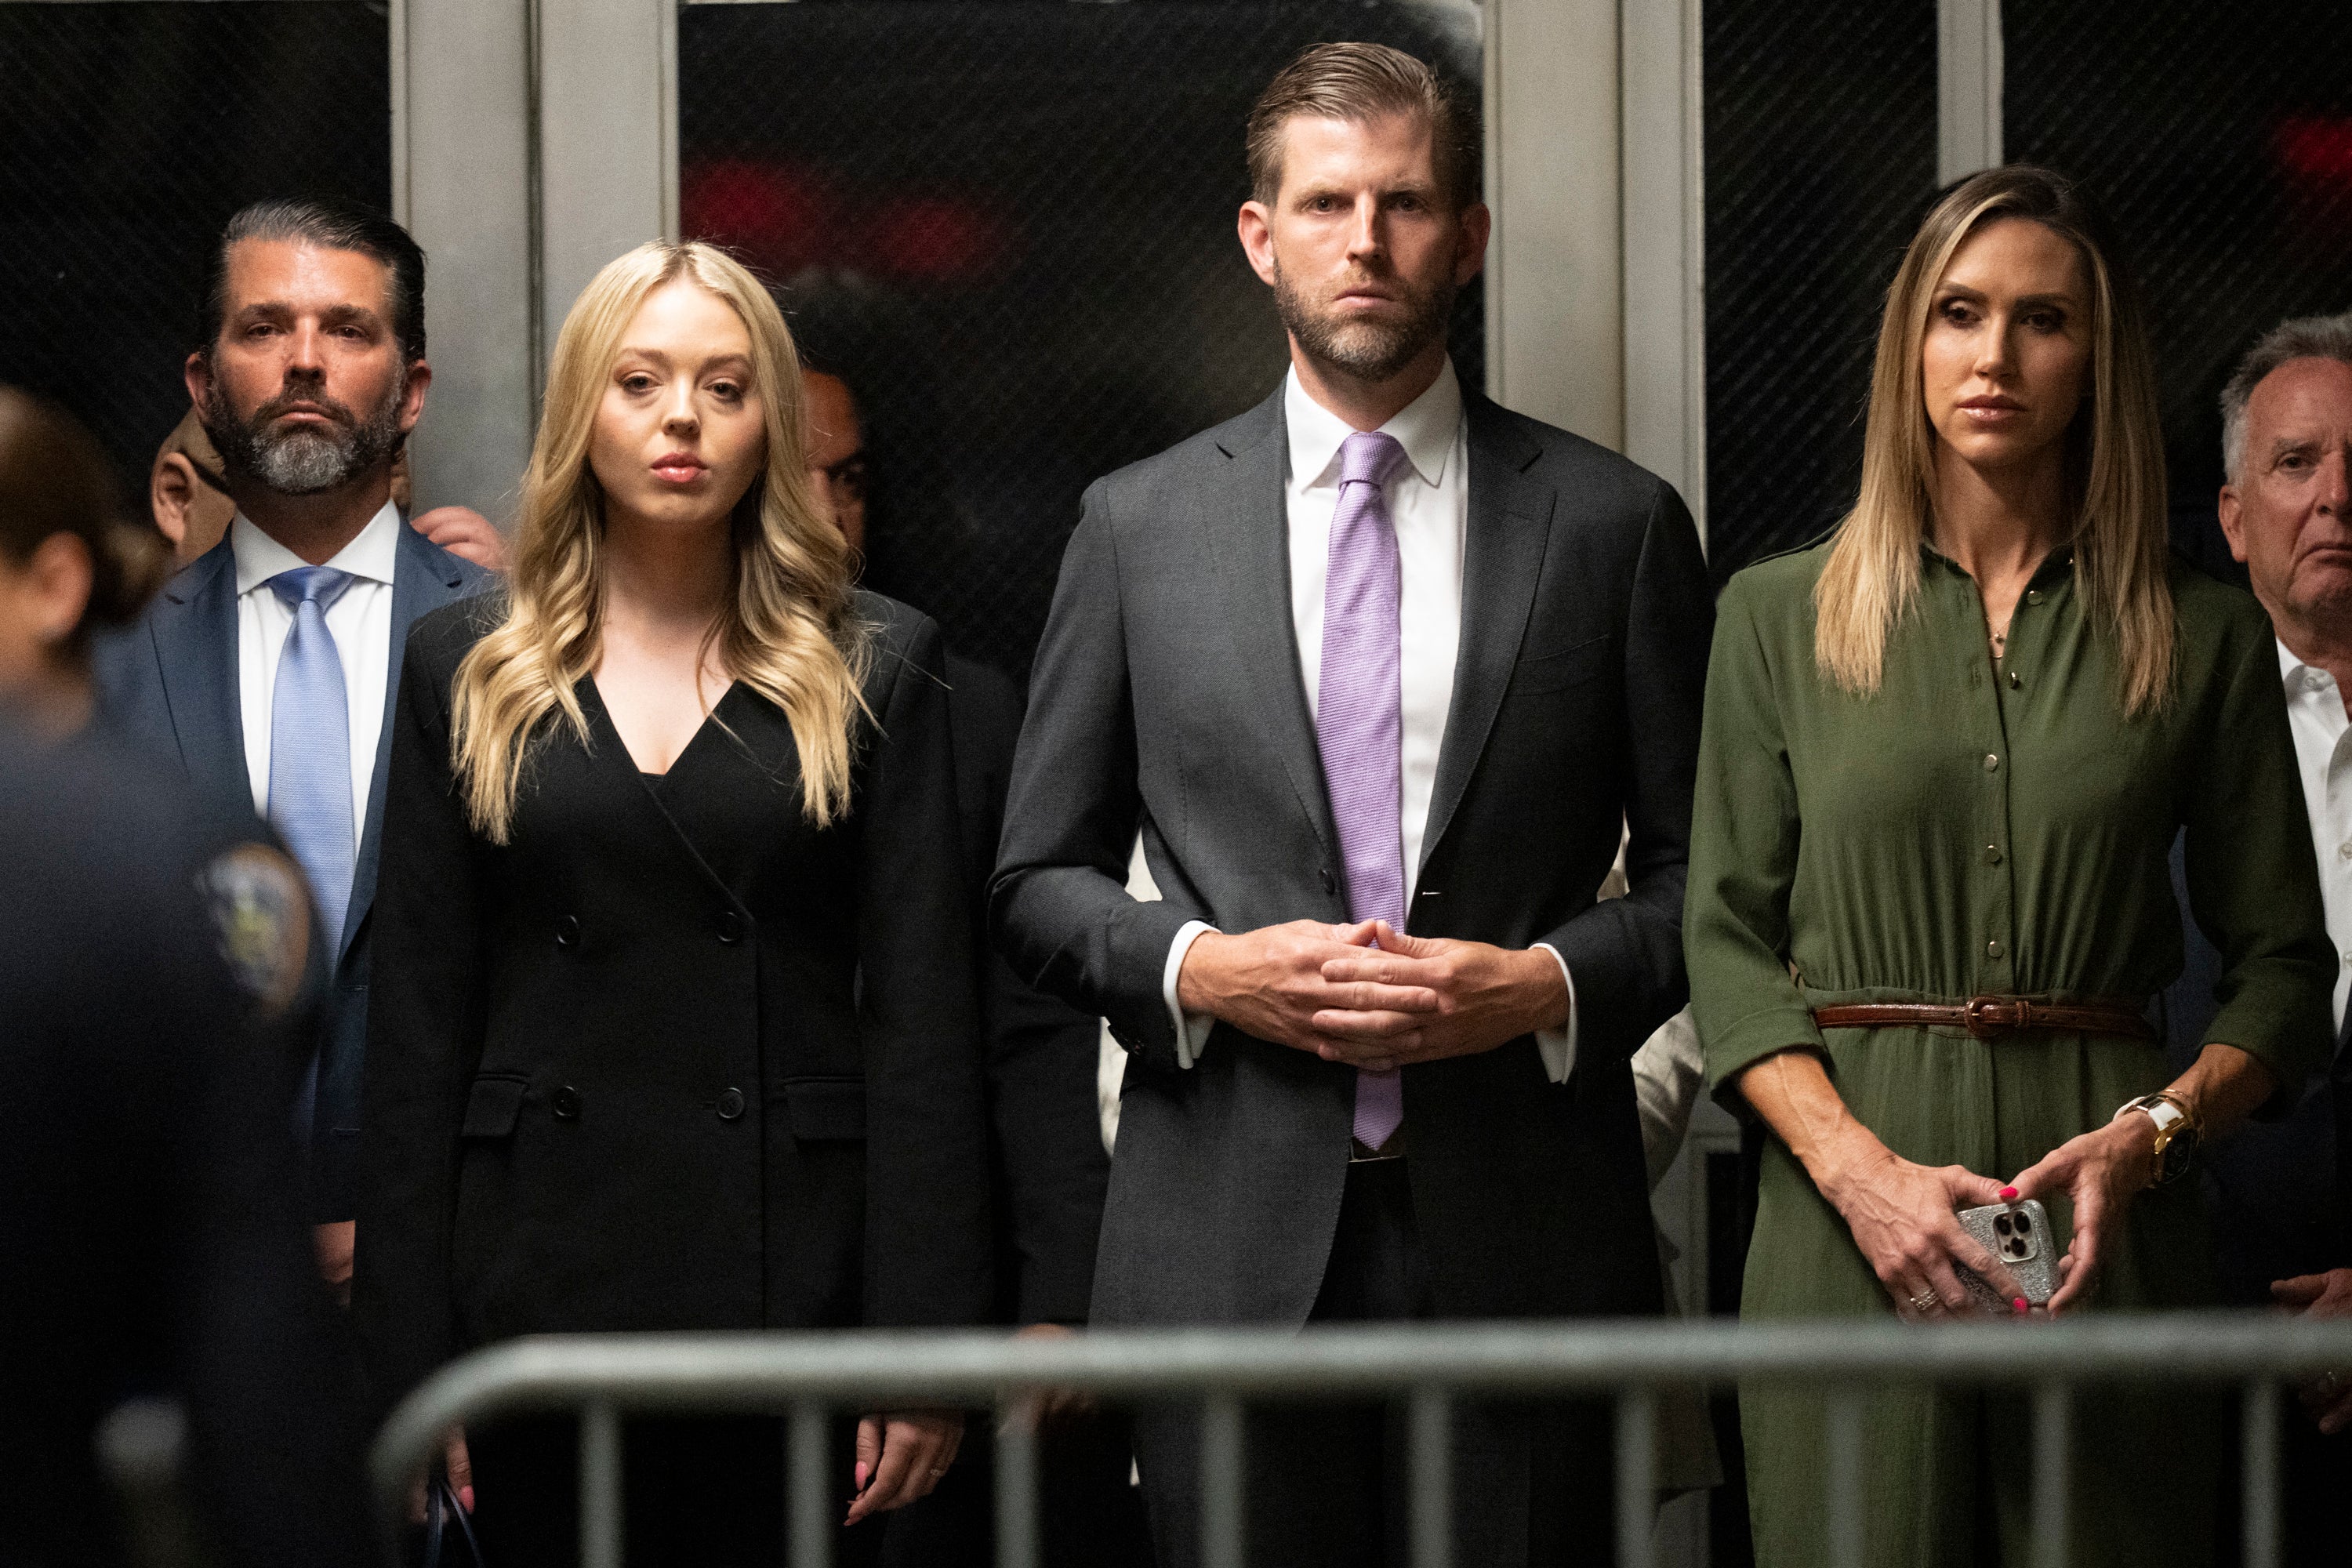 Donald Trump Jr, Tiffany Trump, Eric Trump and Lara Trump attend closing arguments of their father’s criminal trial in New York